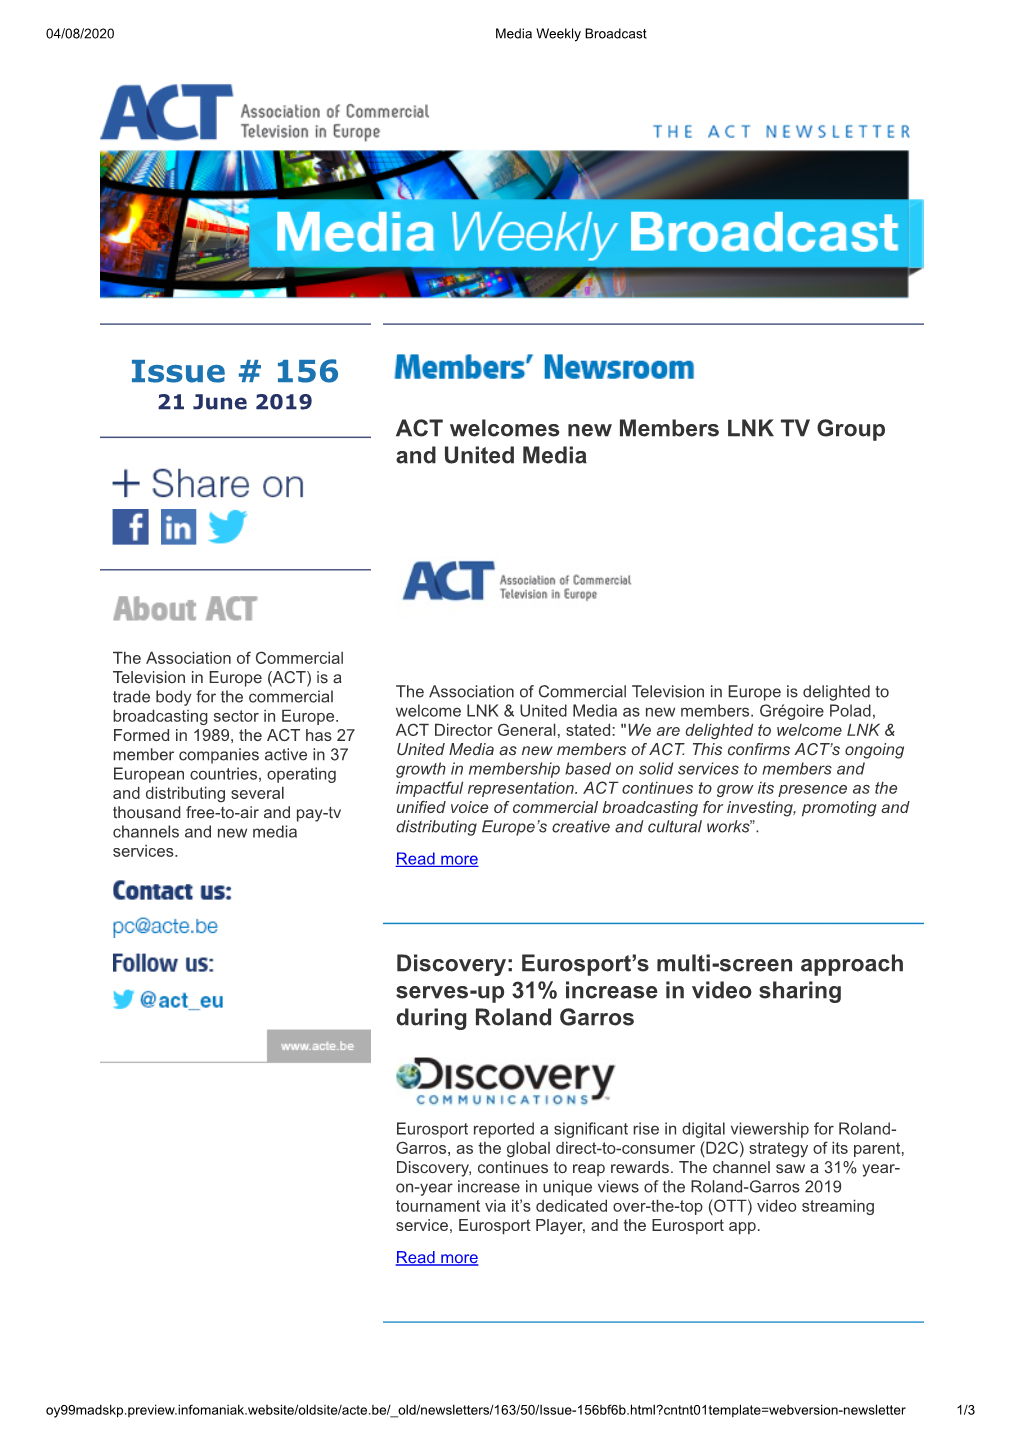 Issue # 156 21 June 2019 ACT Welcomes New Members LNK TV Group and United Media